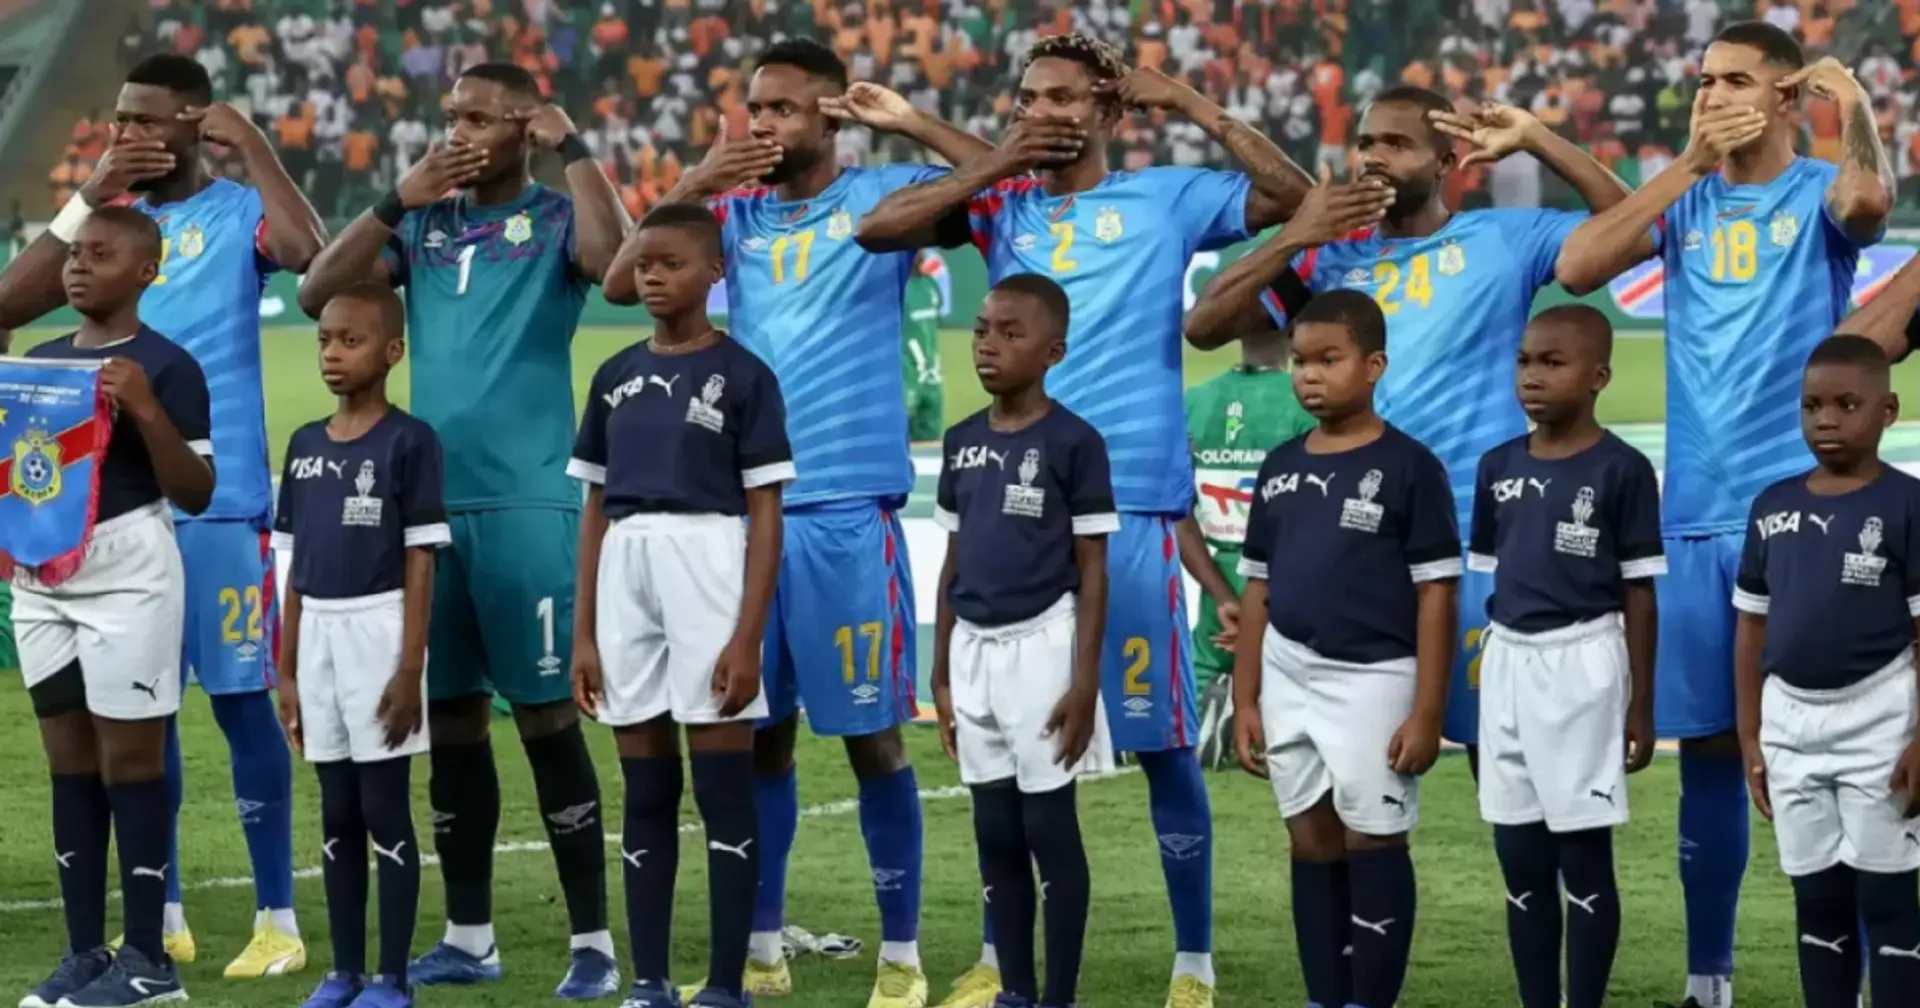 DR Congo squad protest for peace in their country during the national anthem